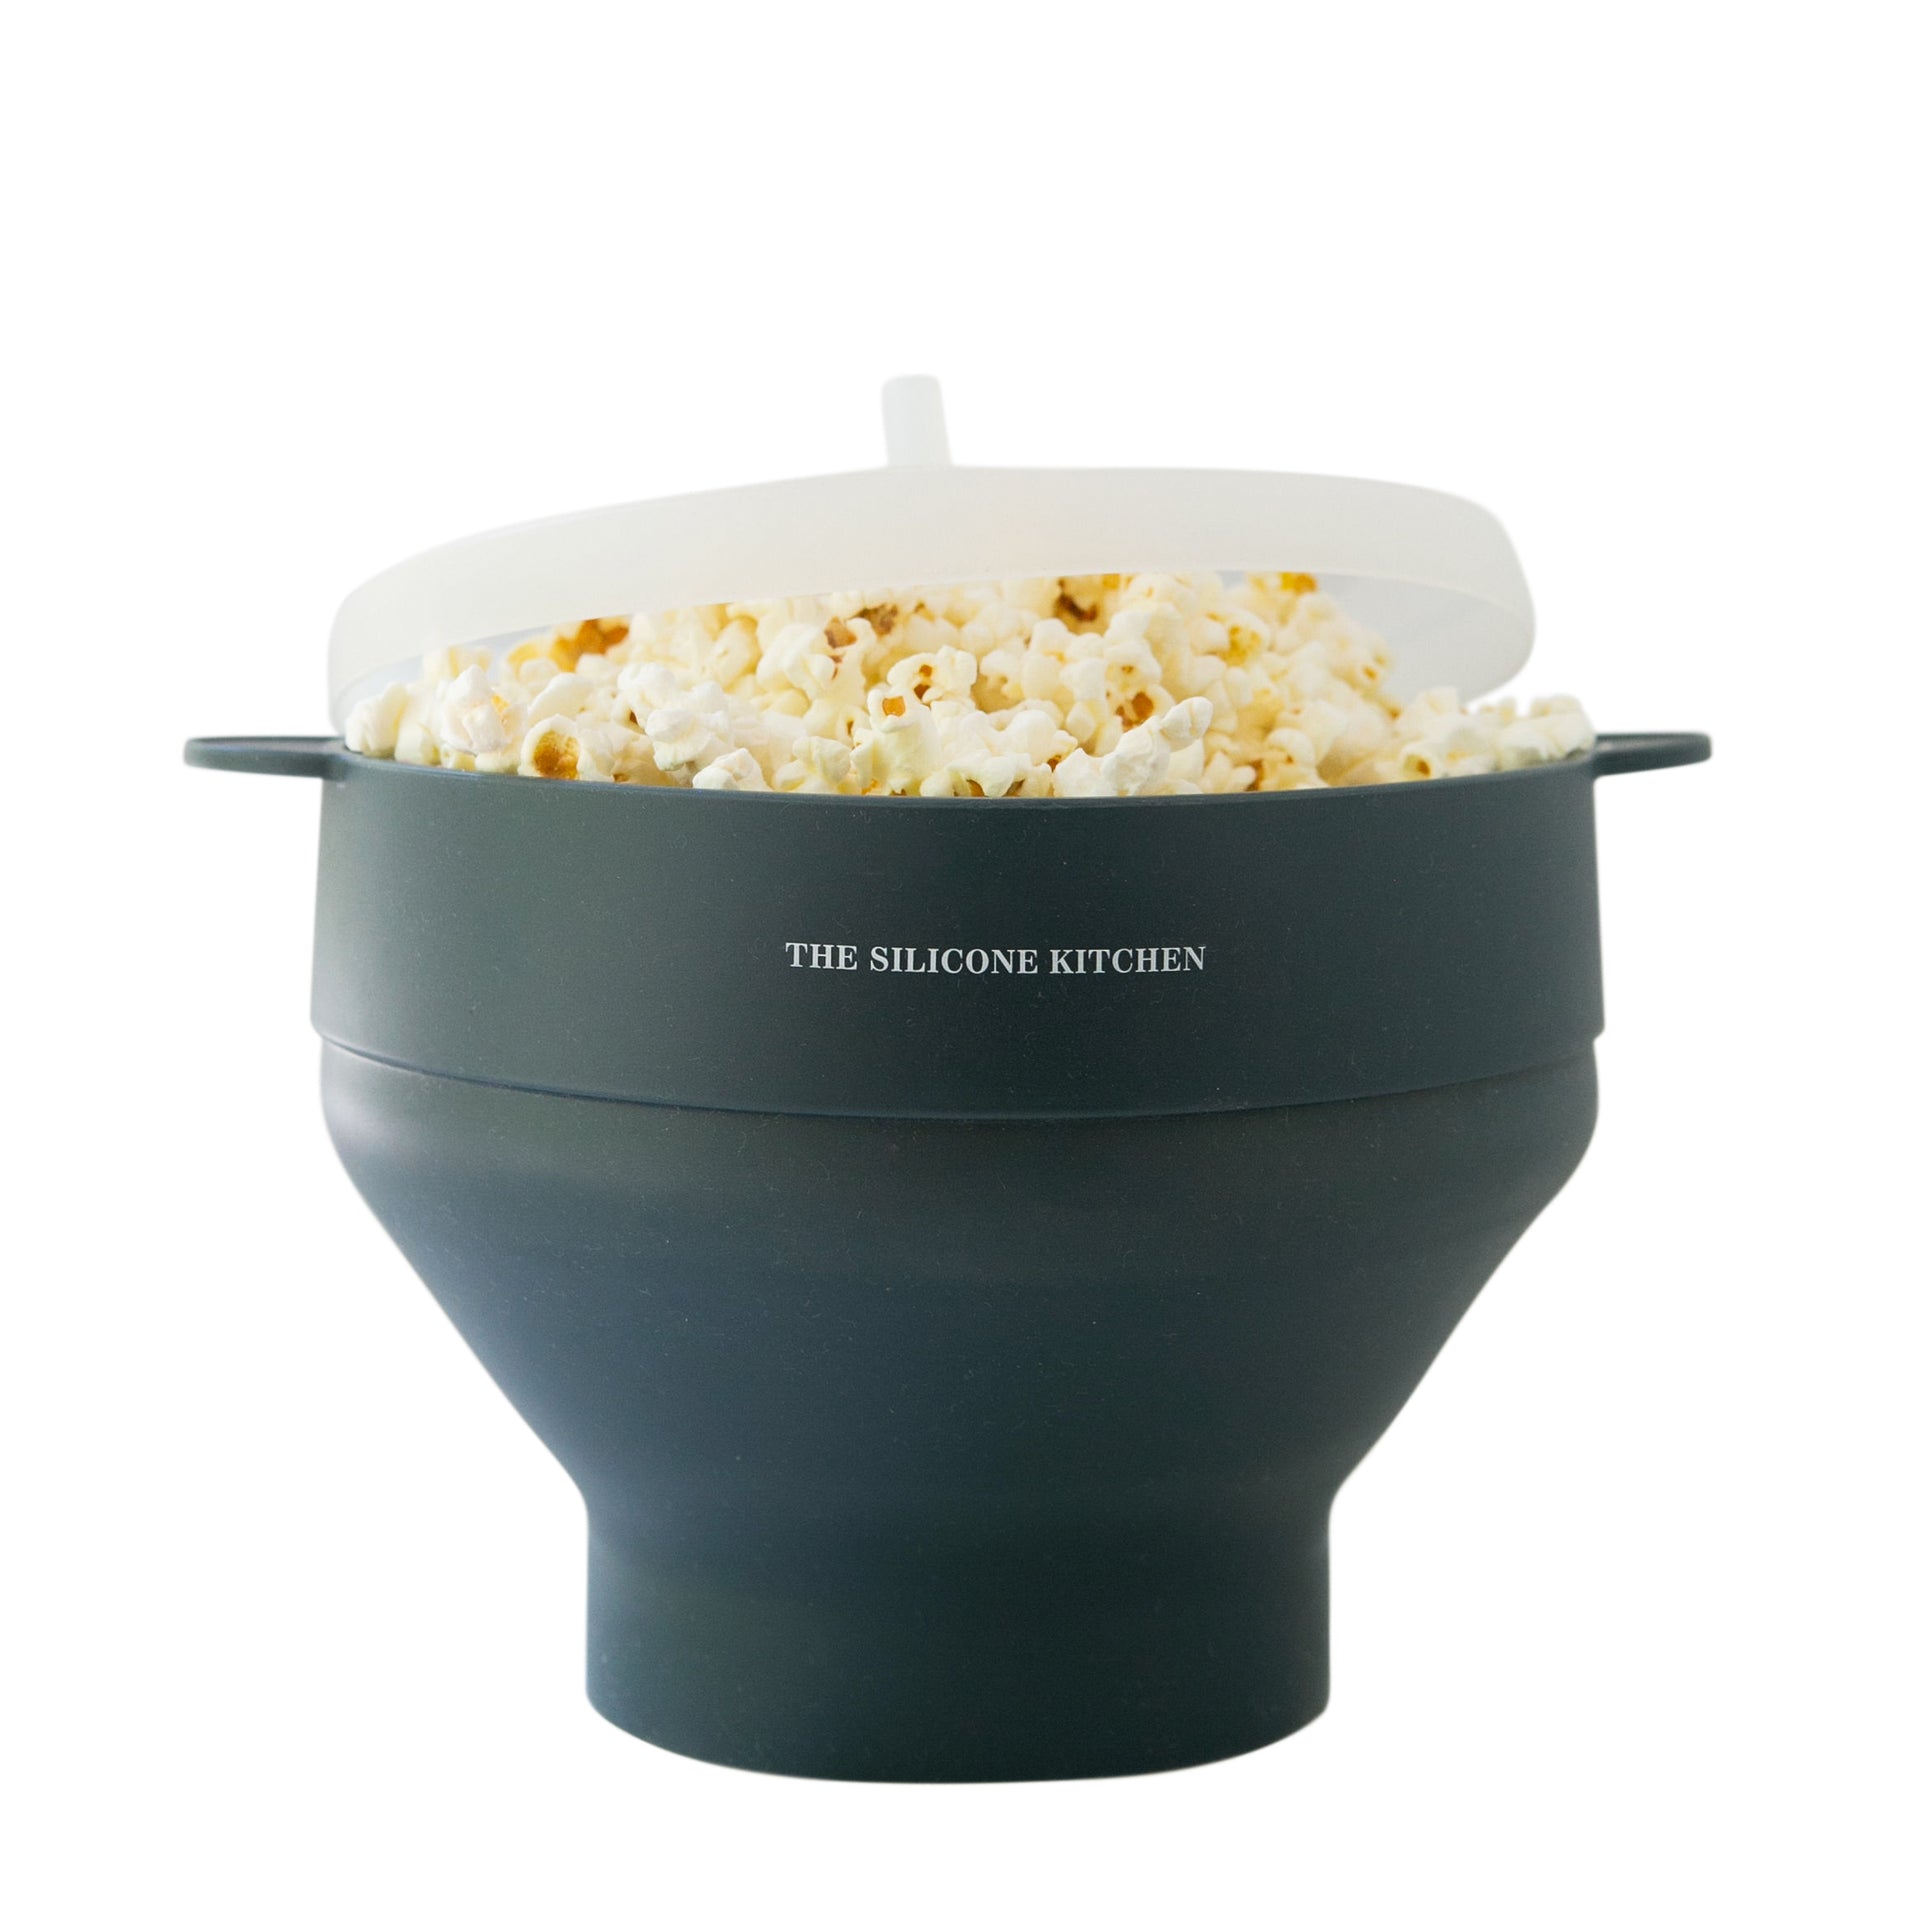 Collapsible Silicone Microwave Popcorn Popper – Spoiled Rotten